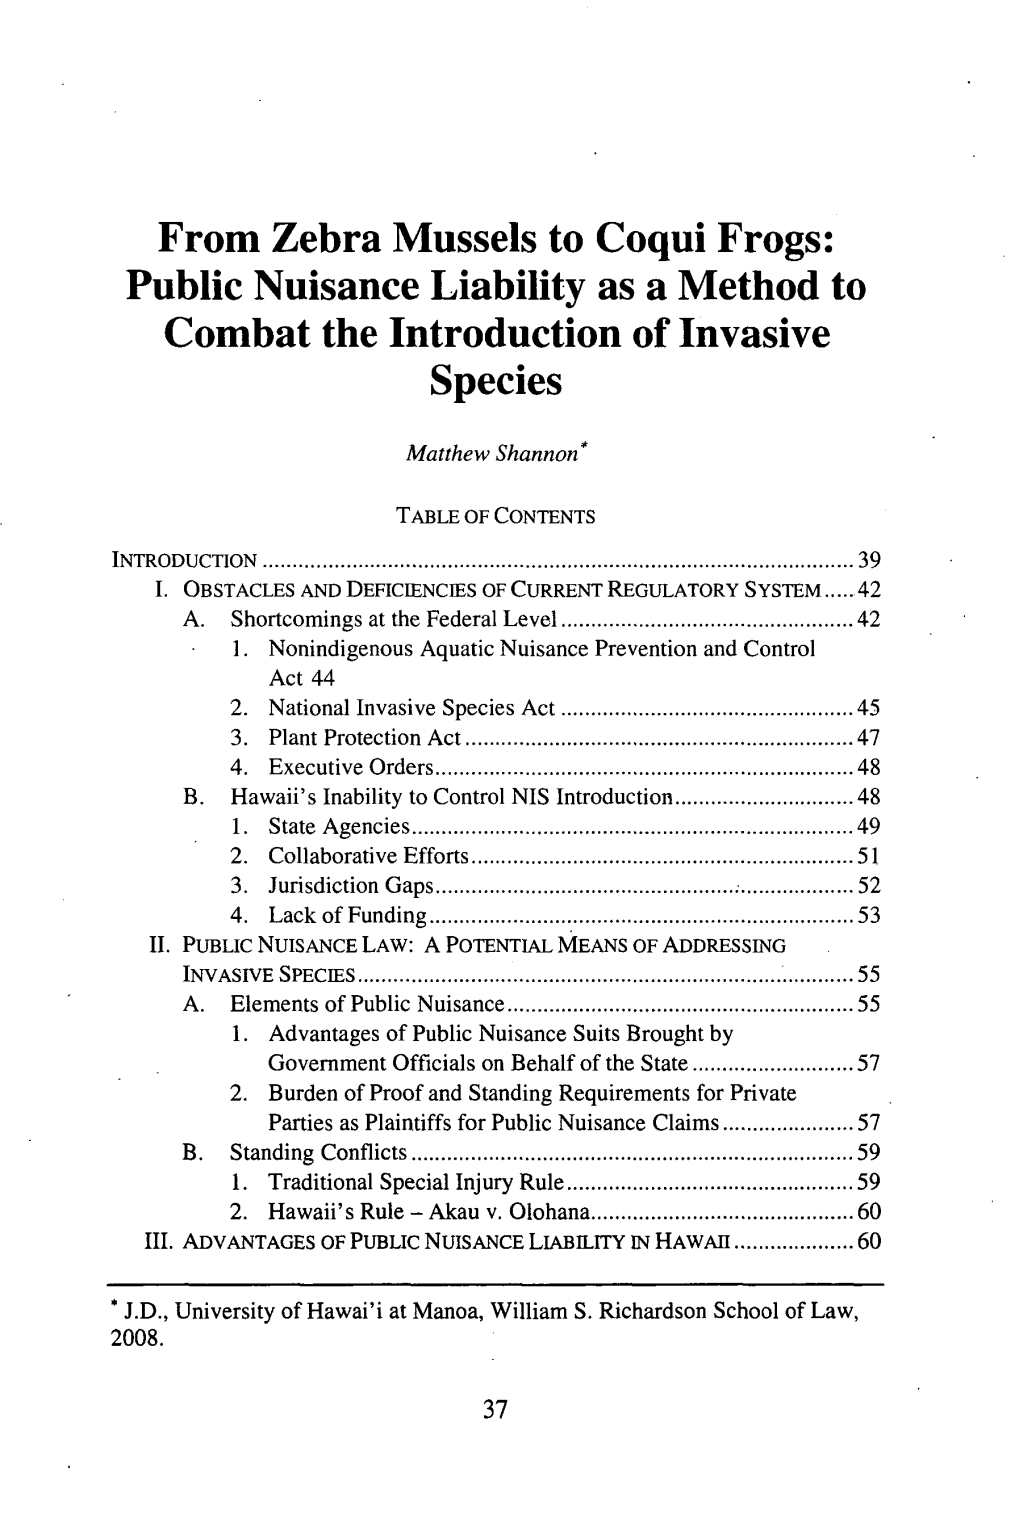 Public Nuisance Liability As a Method to Combat the Introduction of Invasive Species